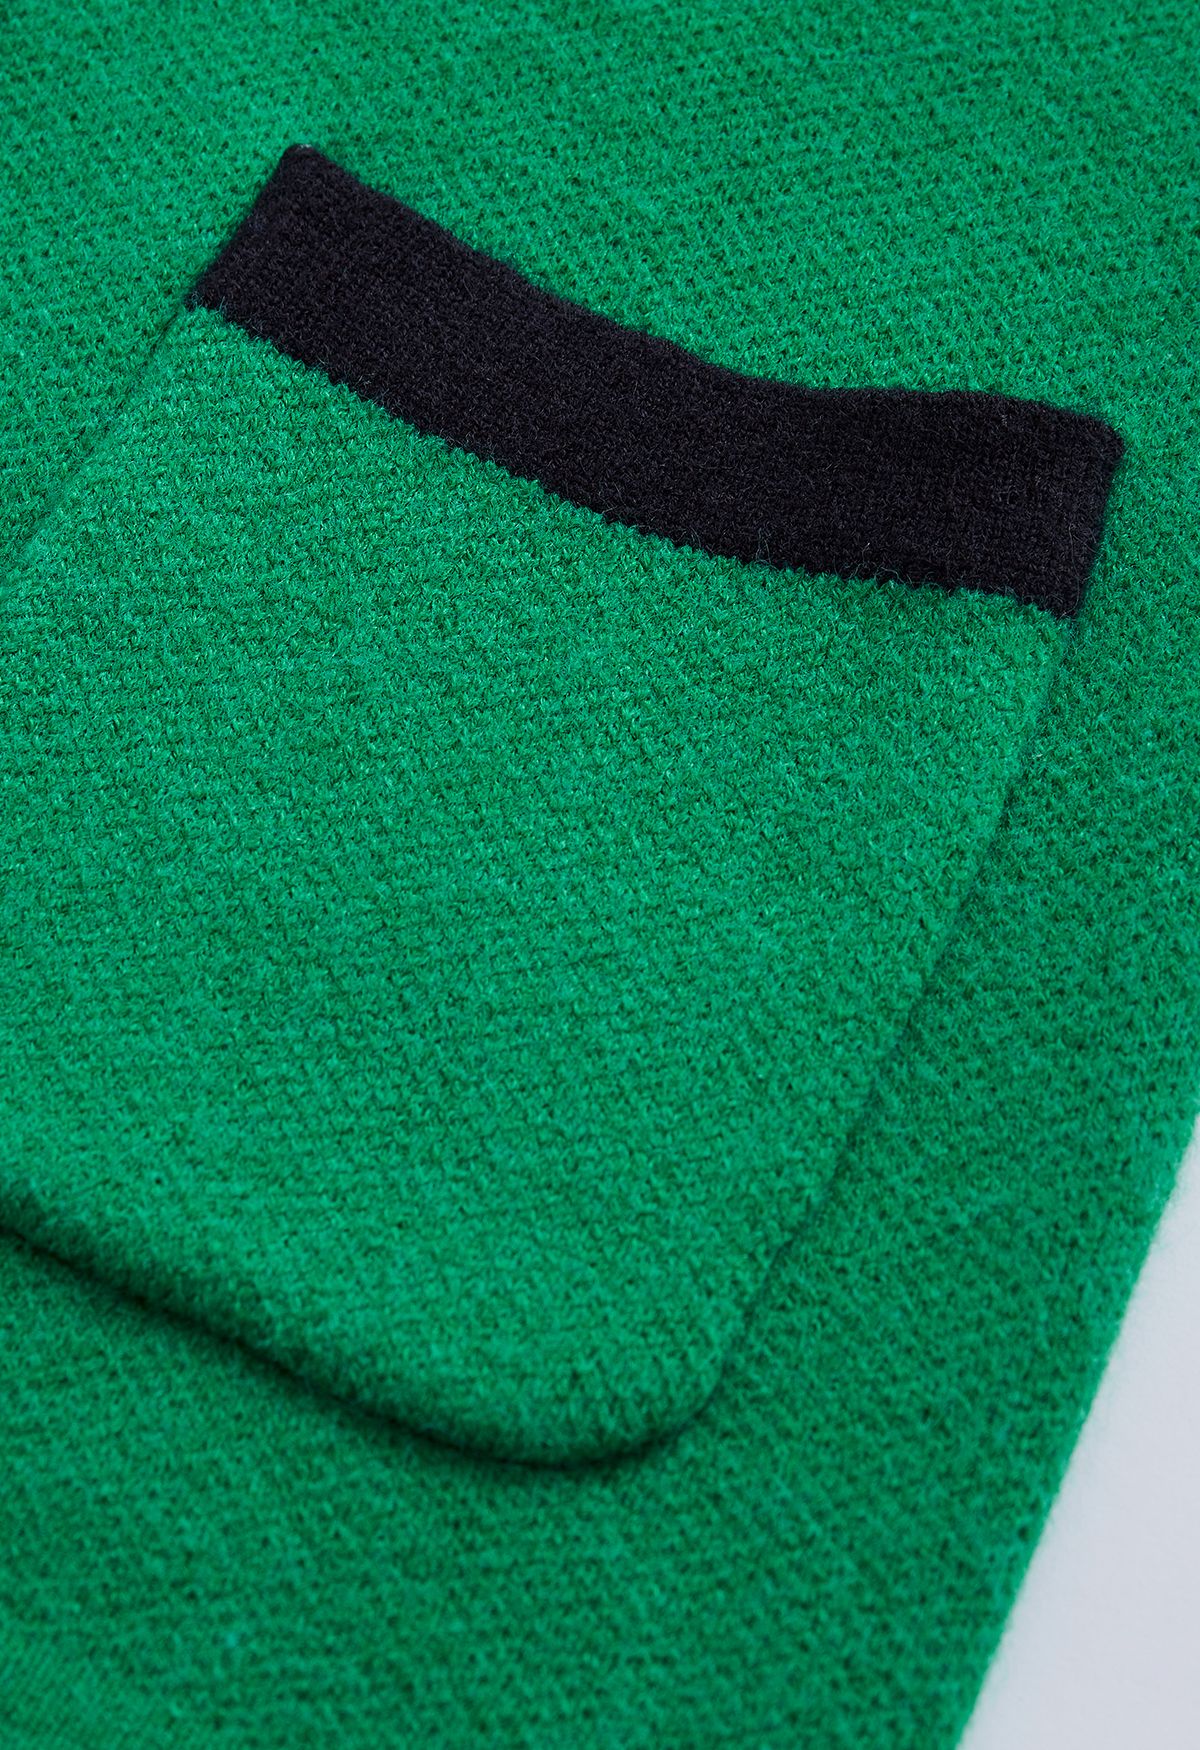 Double-Breasted Contrast Color Cardigan in Green